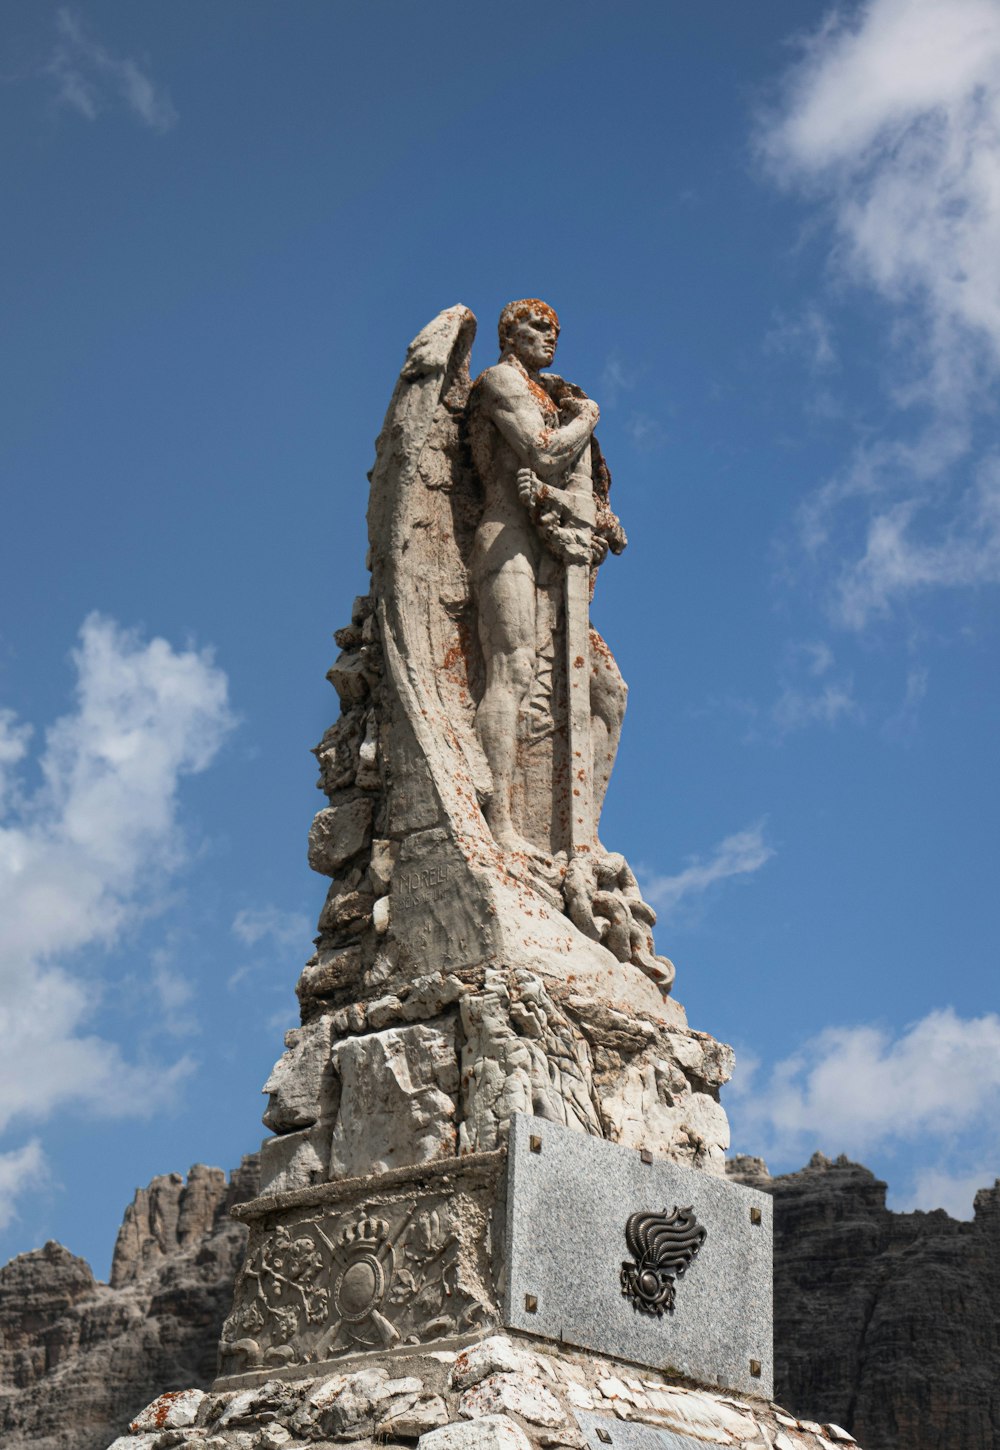 a statue of a man holding a bird on top of a rock